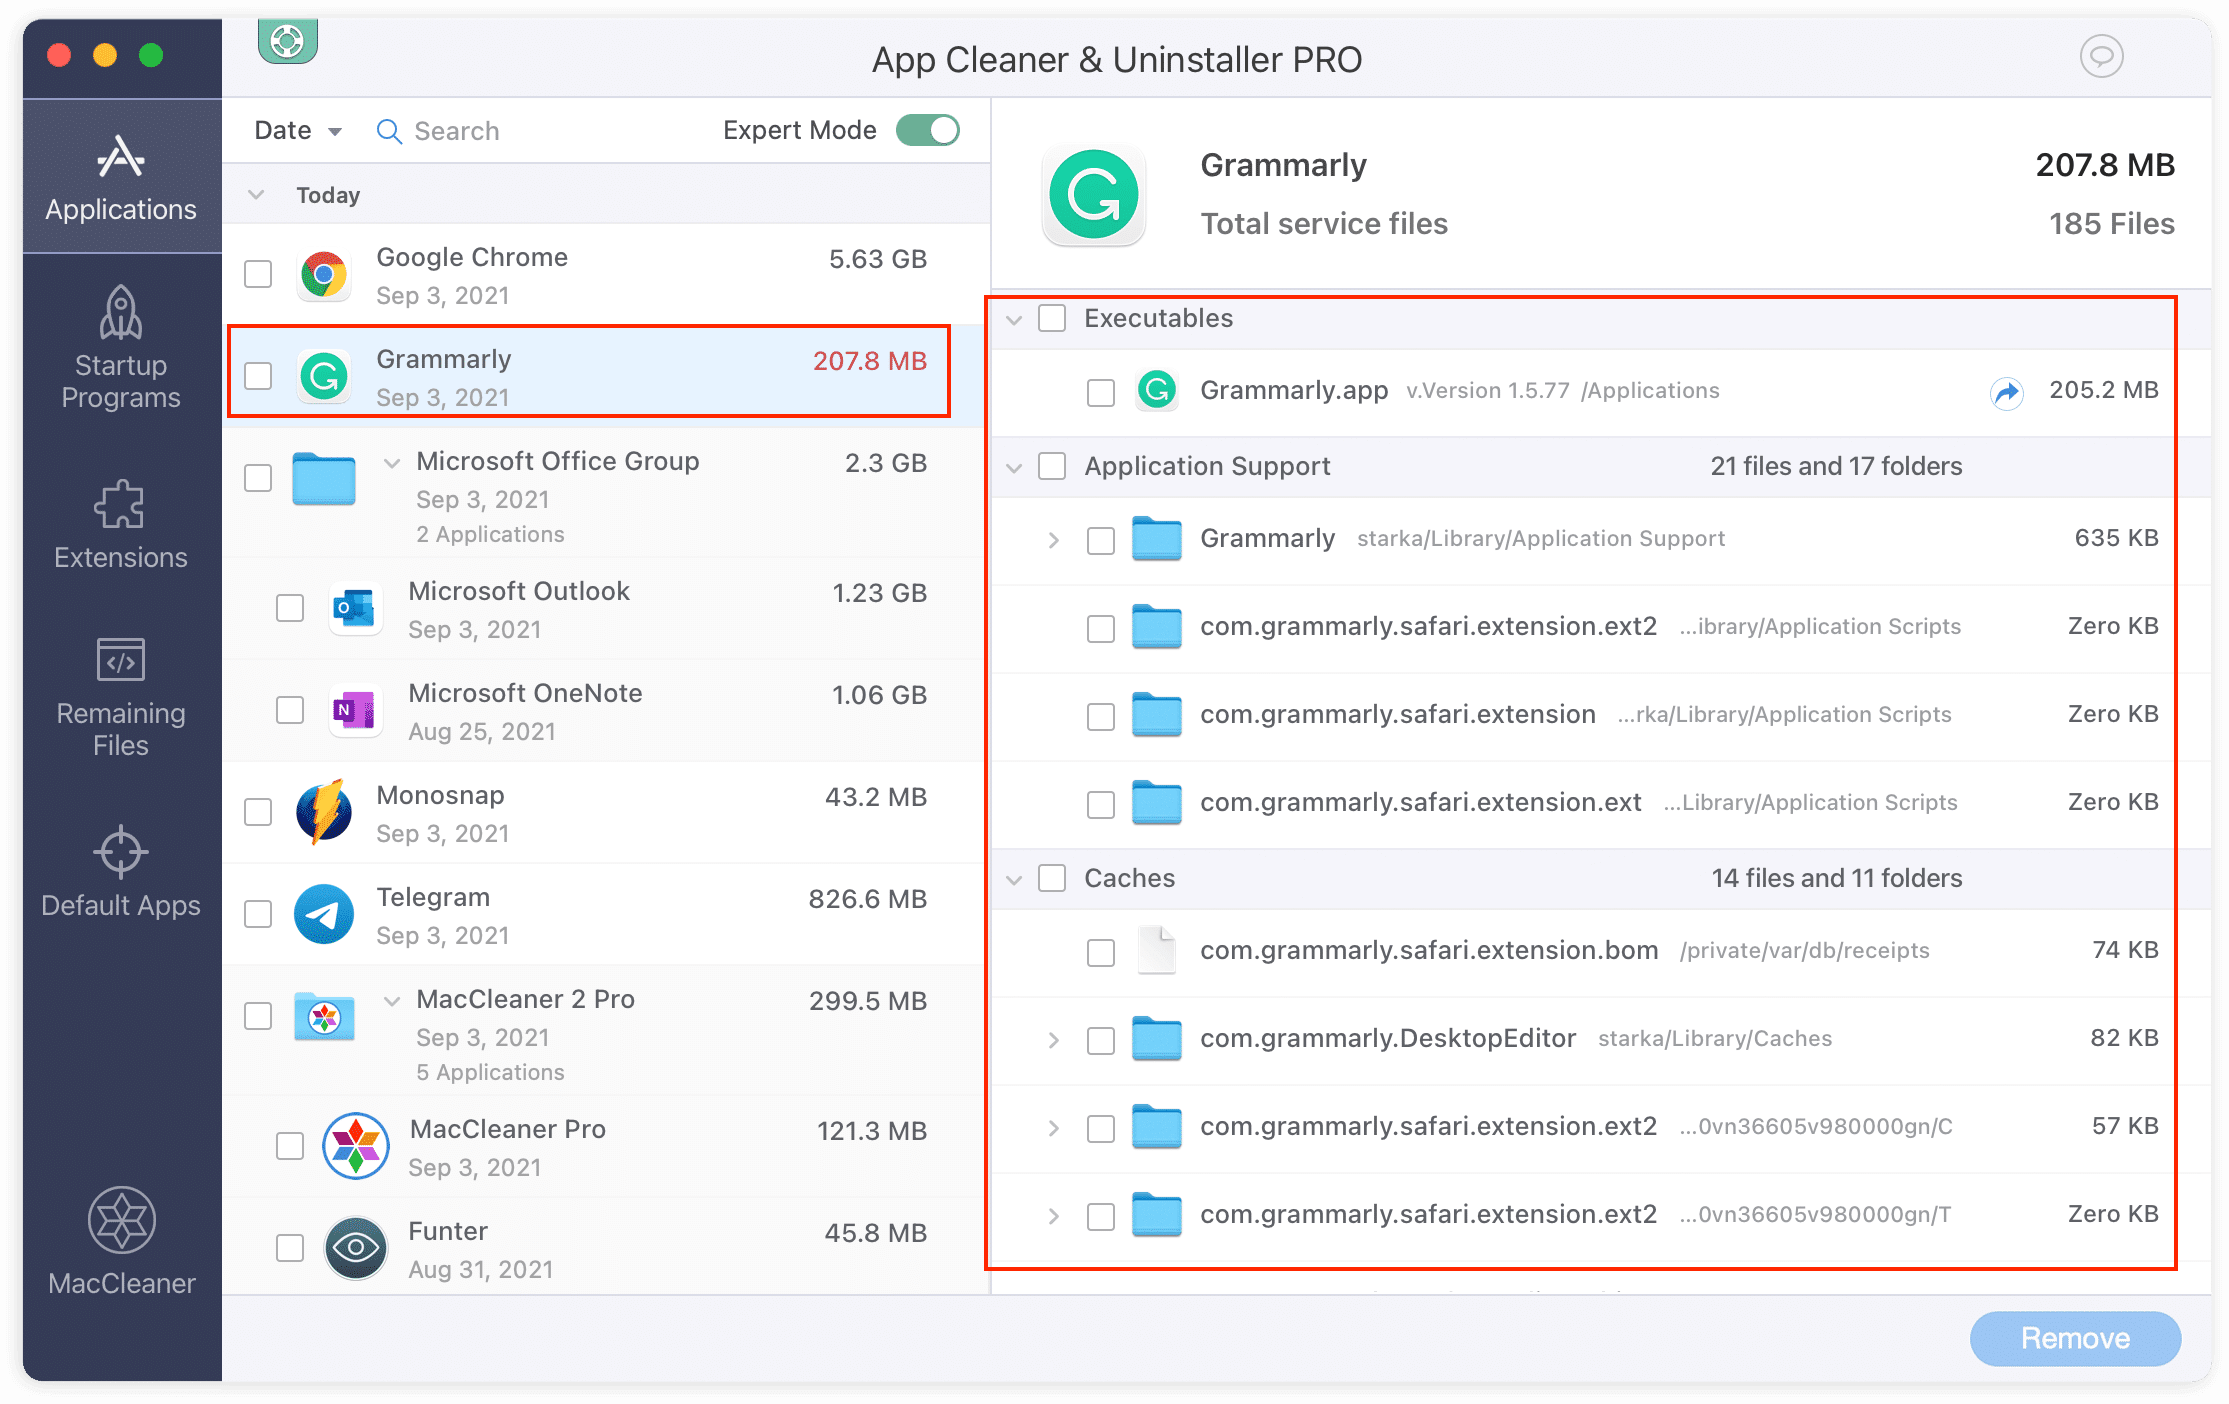 App Cleaner & Uninstaller showing Grammarly support files